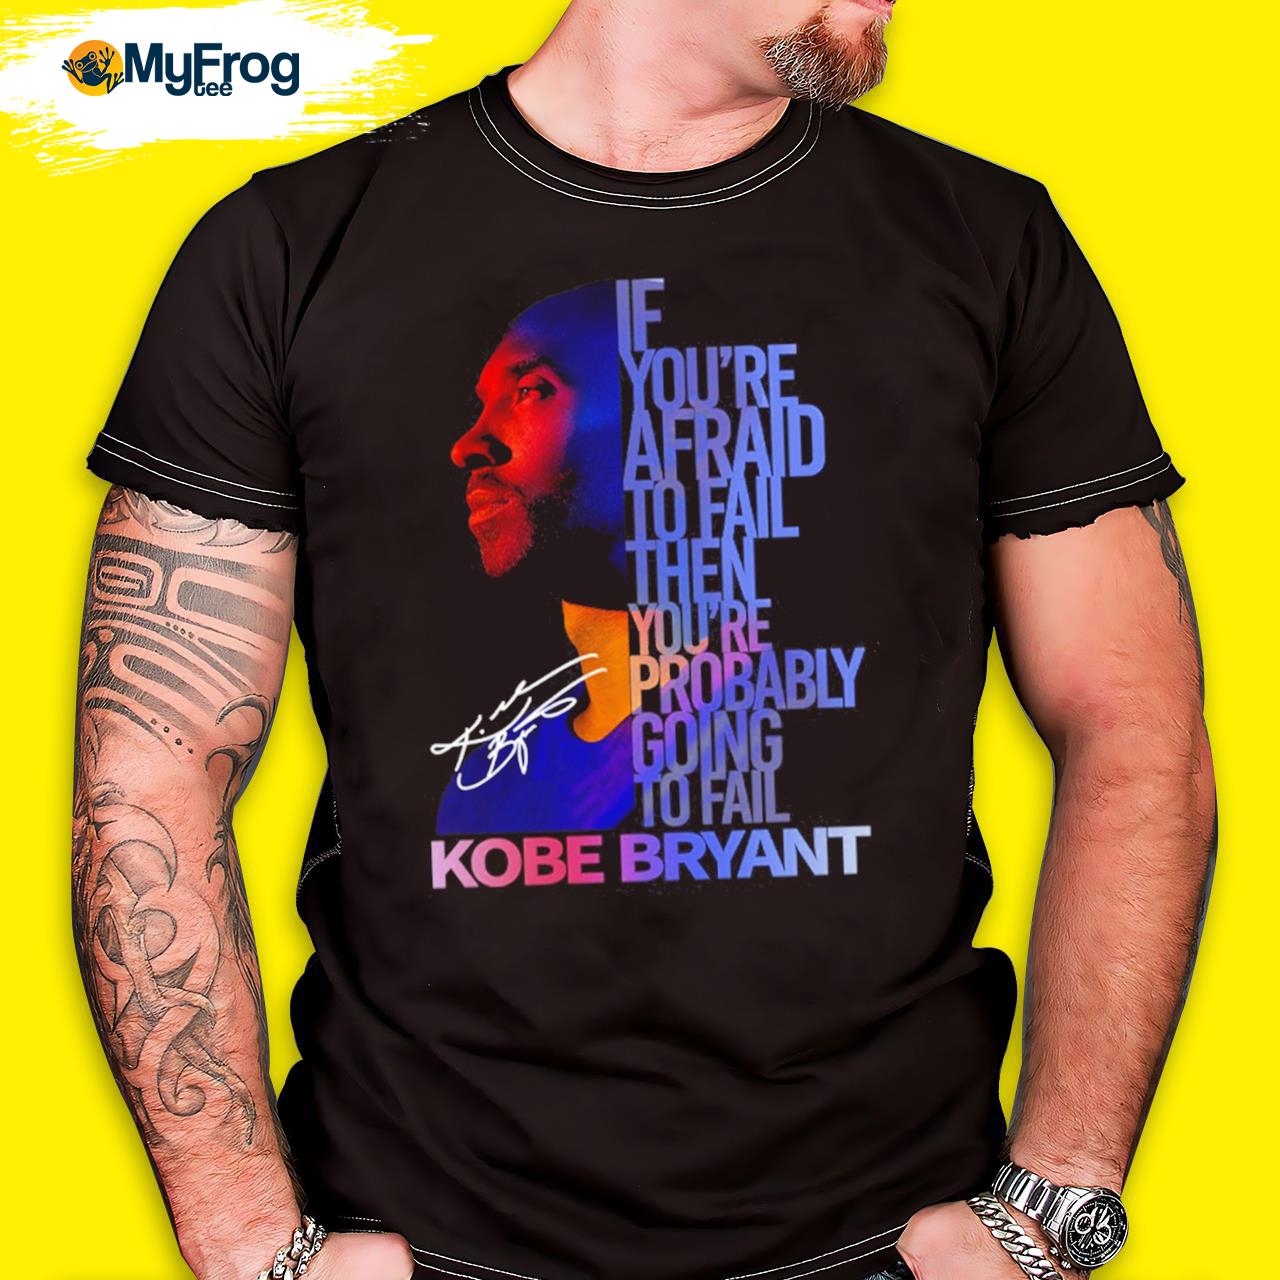 If You're afraid to fail then you're probably going to fail Kobe Bryant shirt